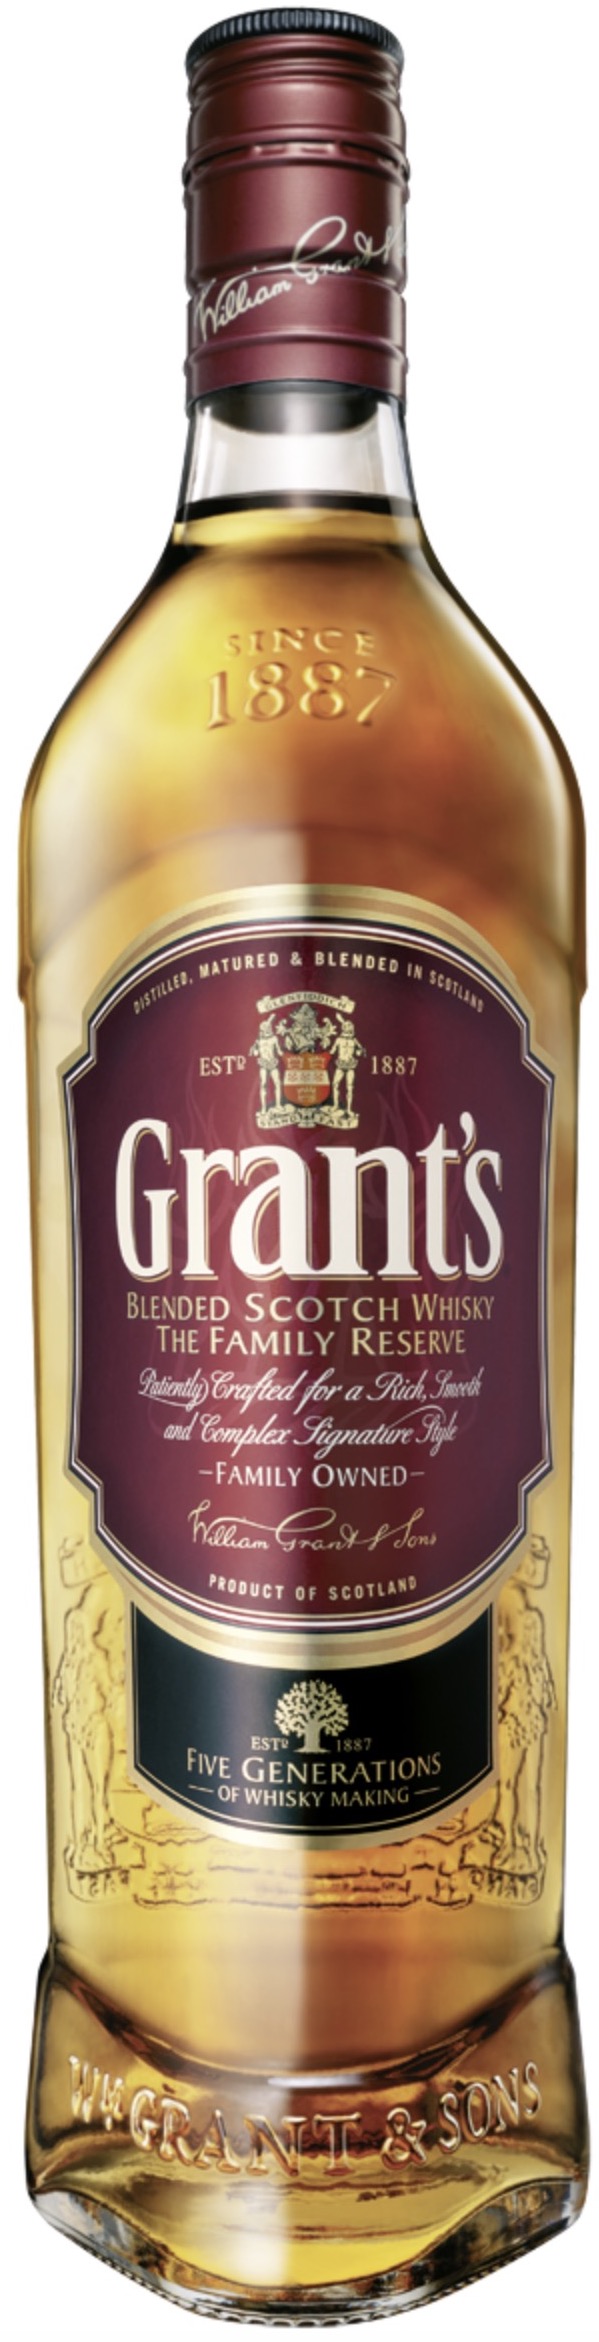 Grant's Blended Scotch Whisky The Family Reserve 40% 0,7L